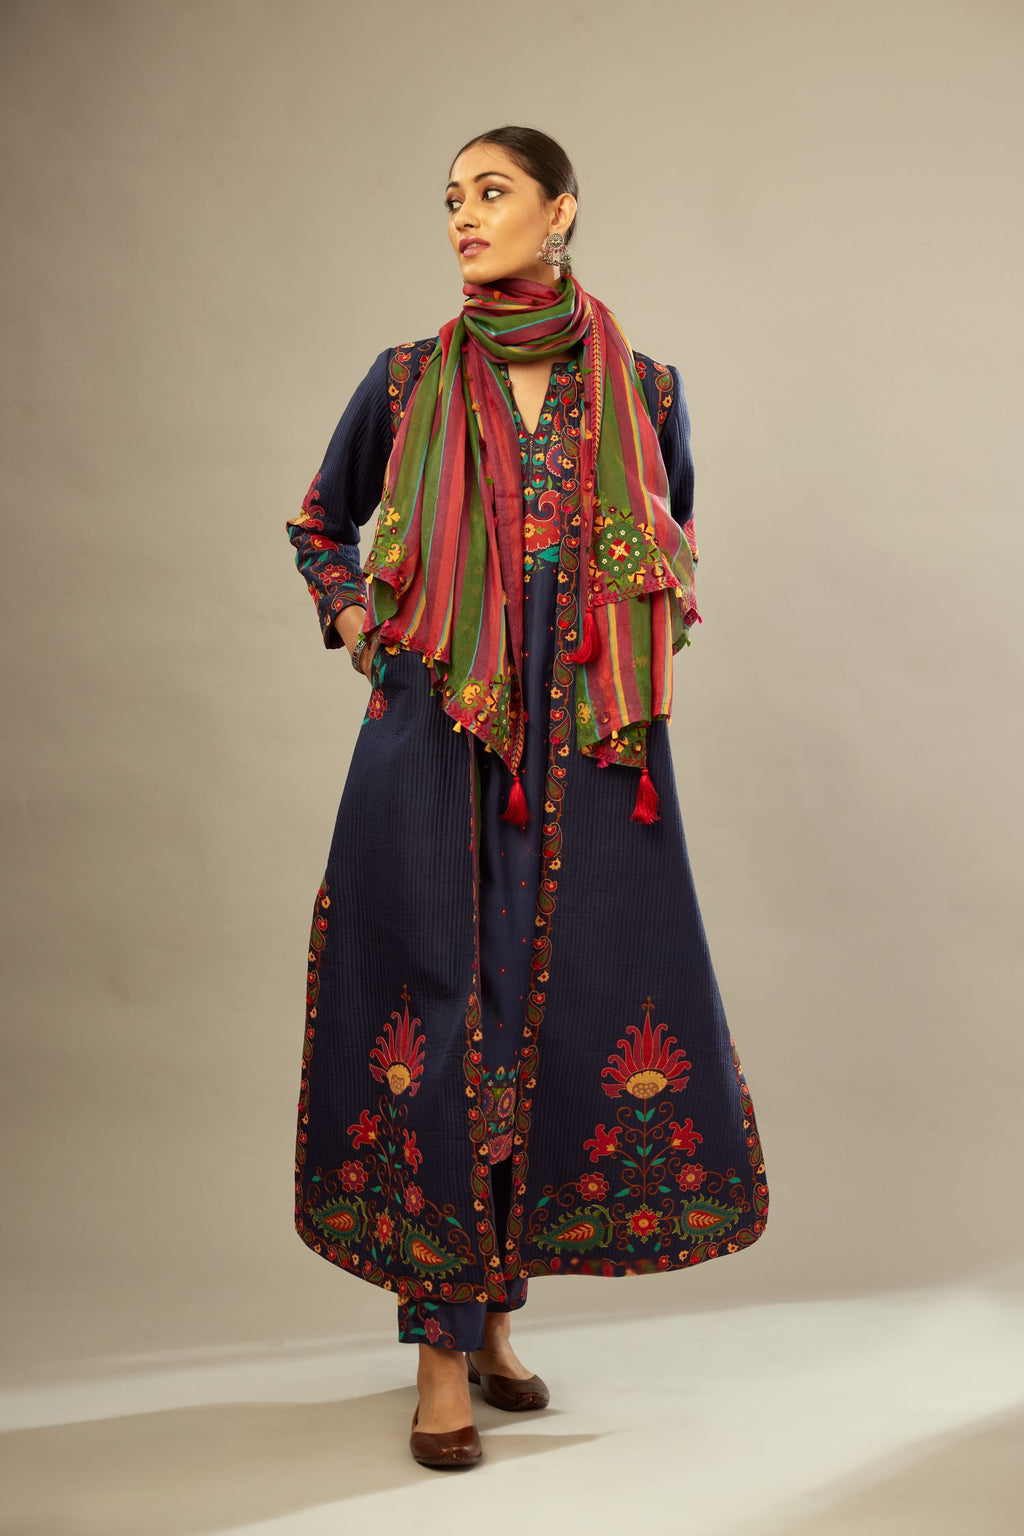 Indigo quilted ankle length front open silk jacket with bold multi-colored appliqué flower trellises.